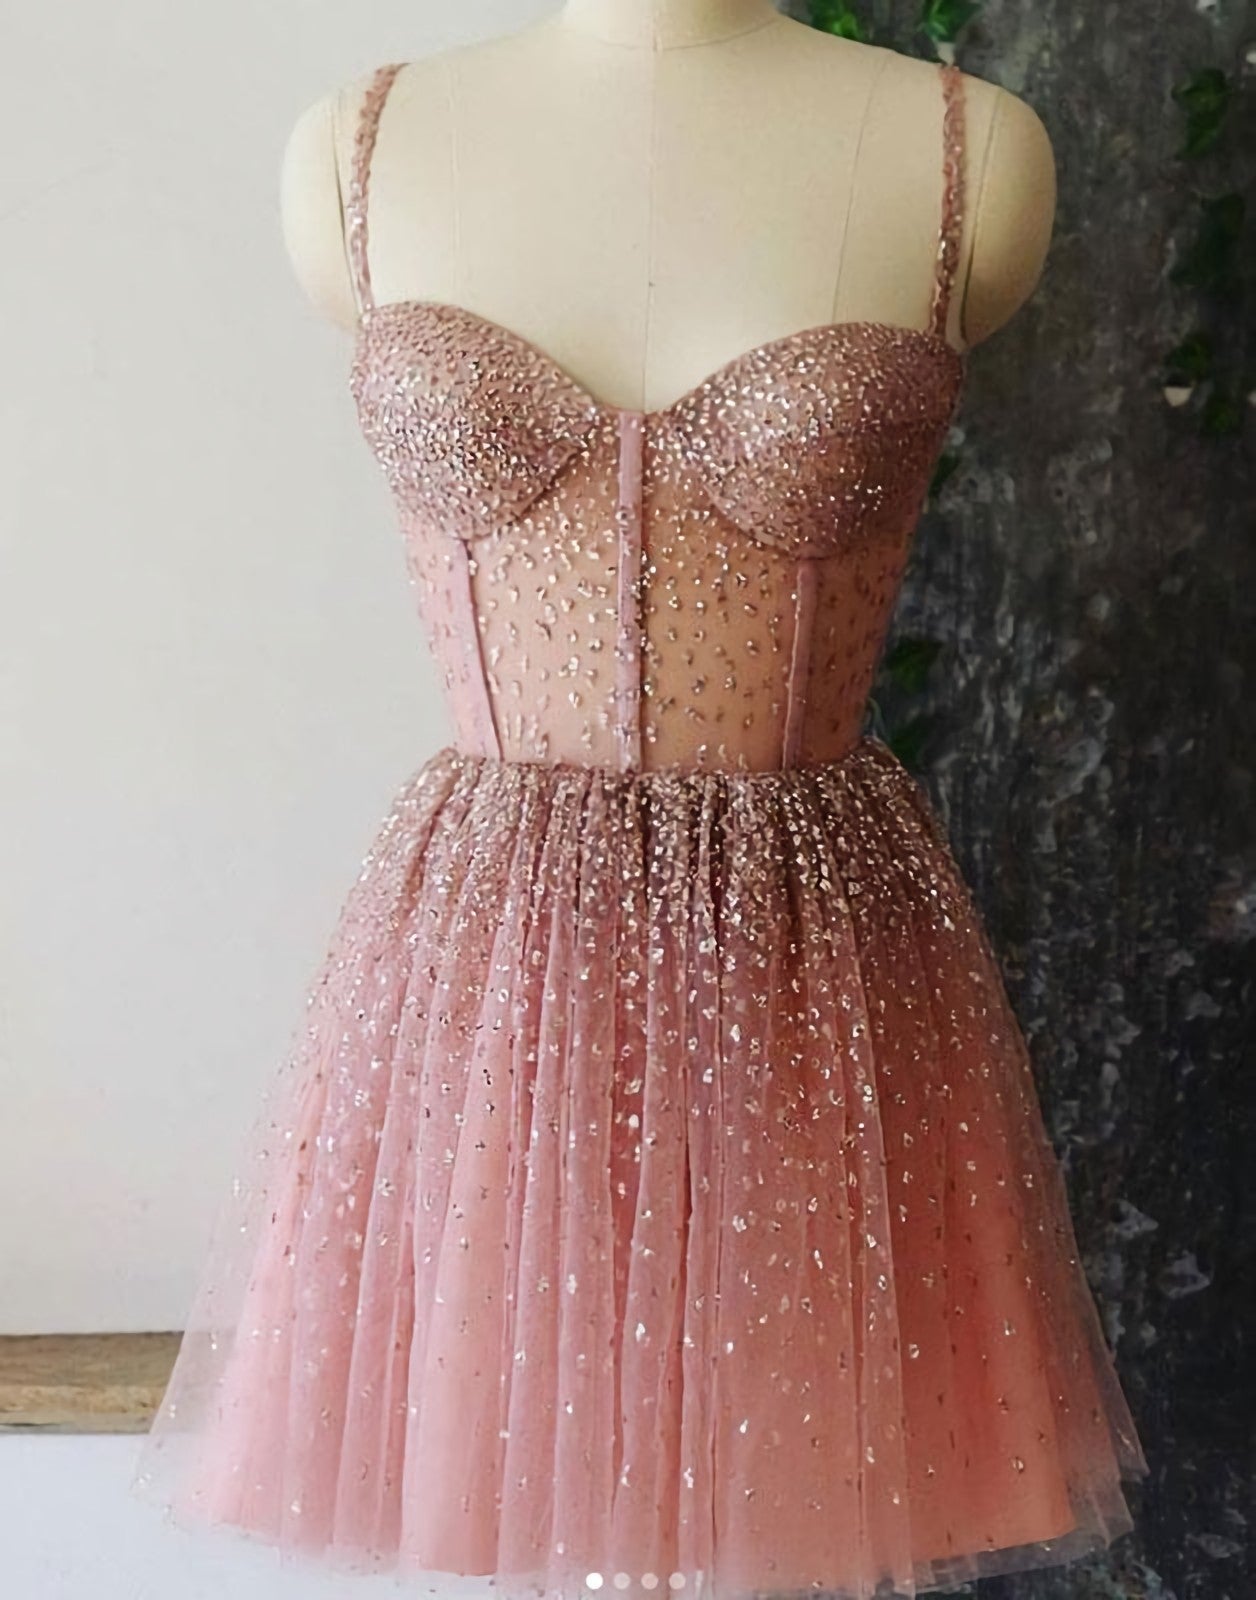 Prom Dresses Short, A Line Spaghetti Straps Short Dresses, Dusty Pink Beaded Homecoming Dress